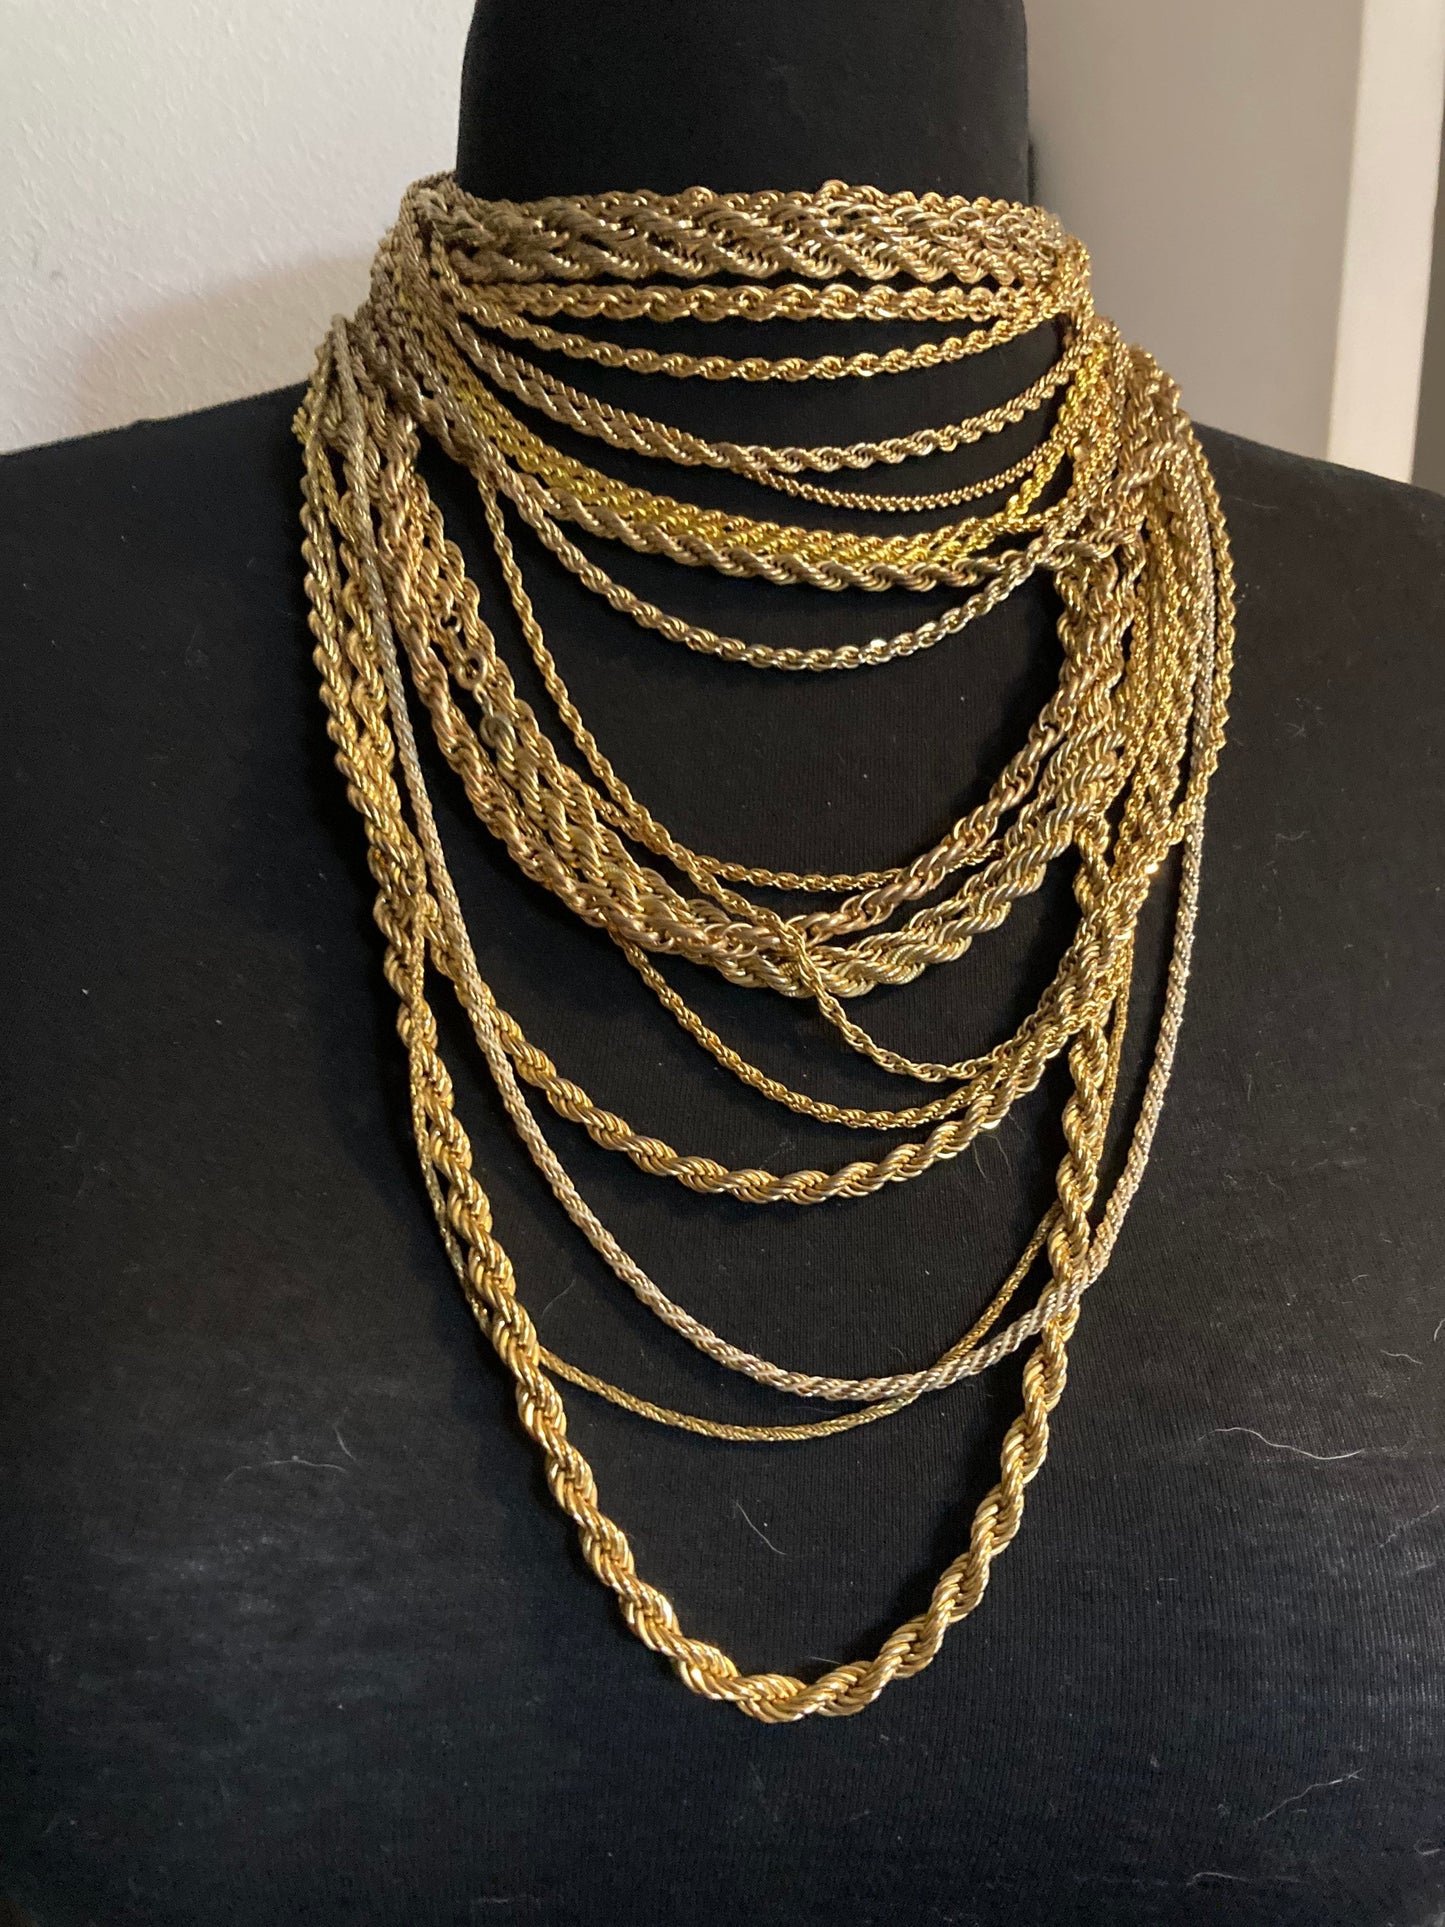 Short length Vintage retro plain gold tone twisted rope chain necklace 48cm spring ring